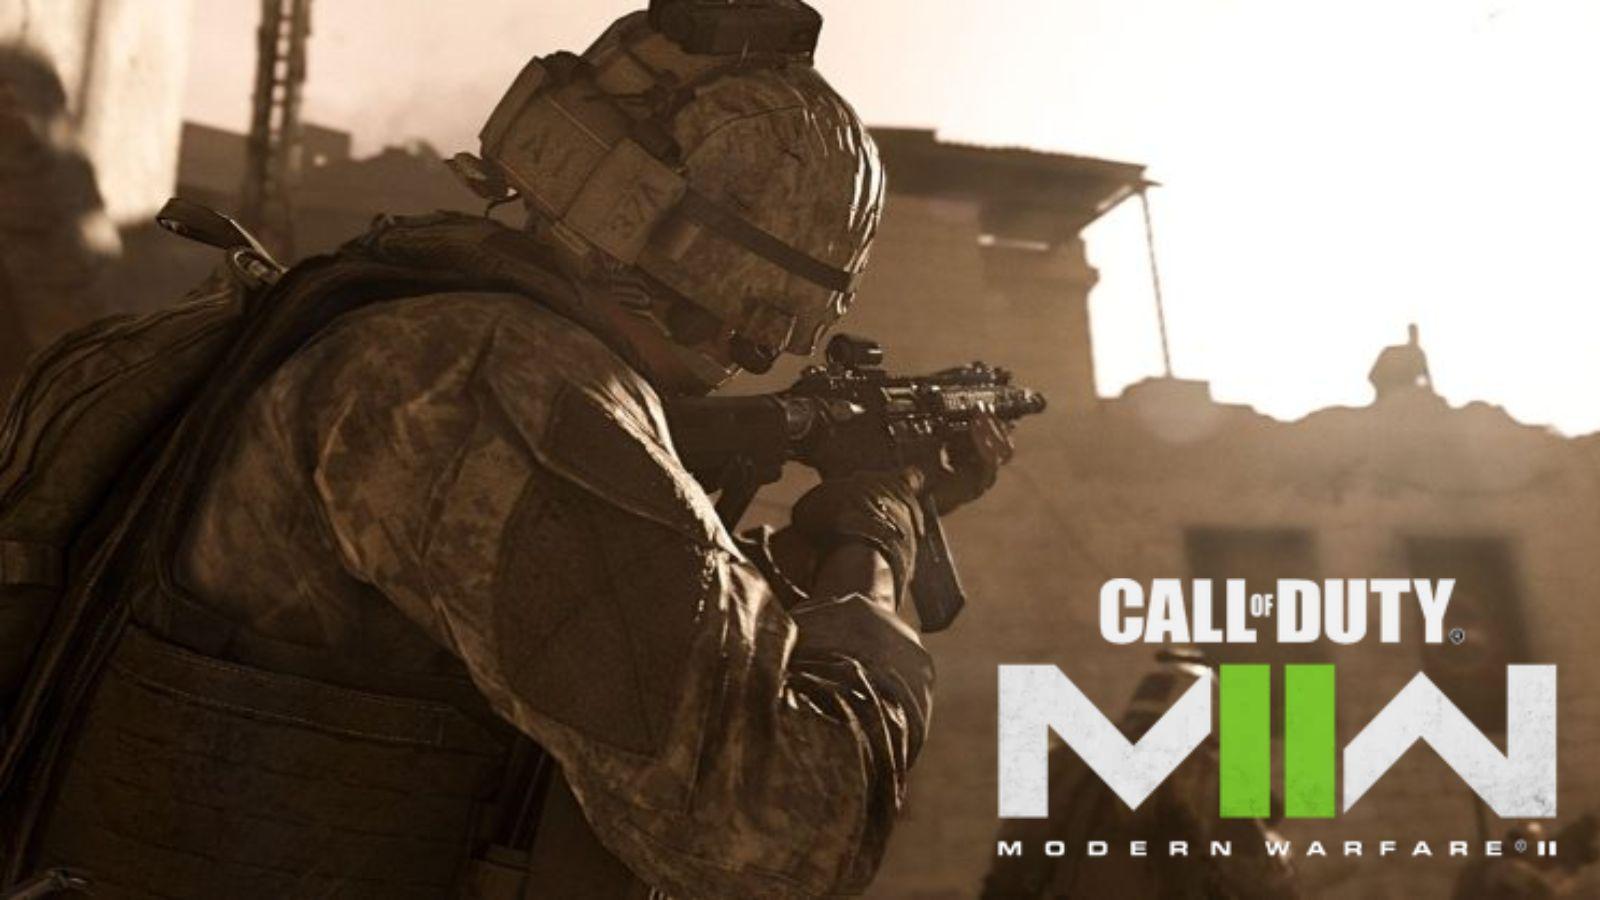 Call Of Duty: Modern Warfare 2' Destroys Records With $800 Million